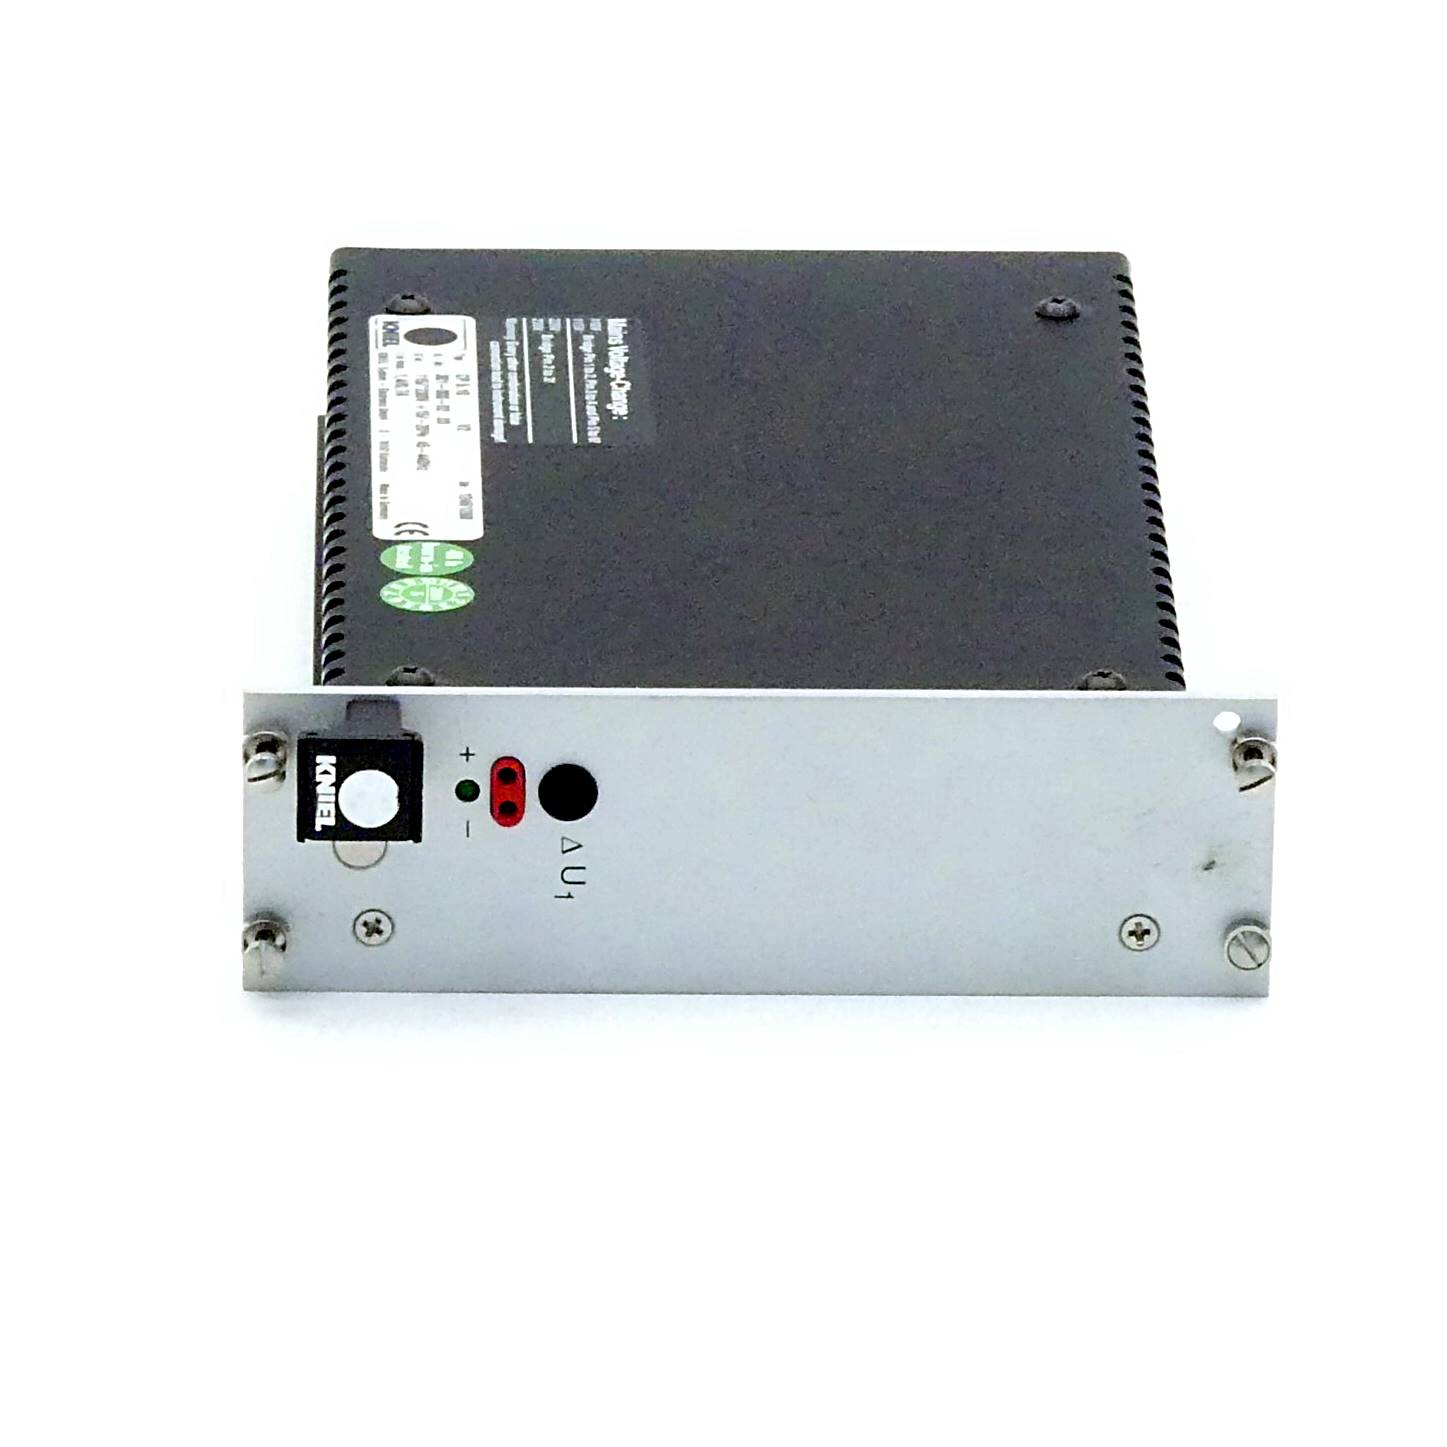 Primary Switched Power Supply CP 5.10 